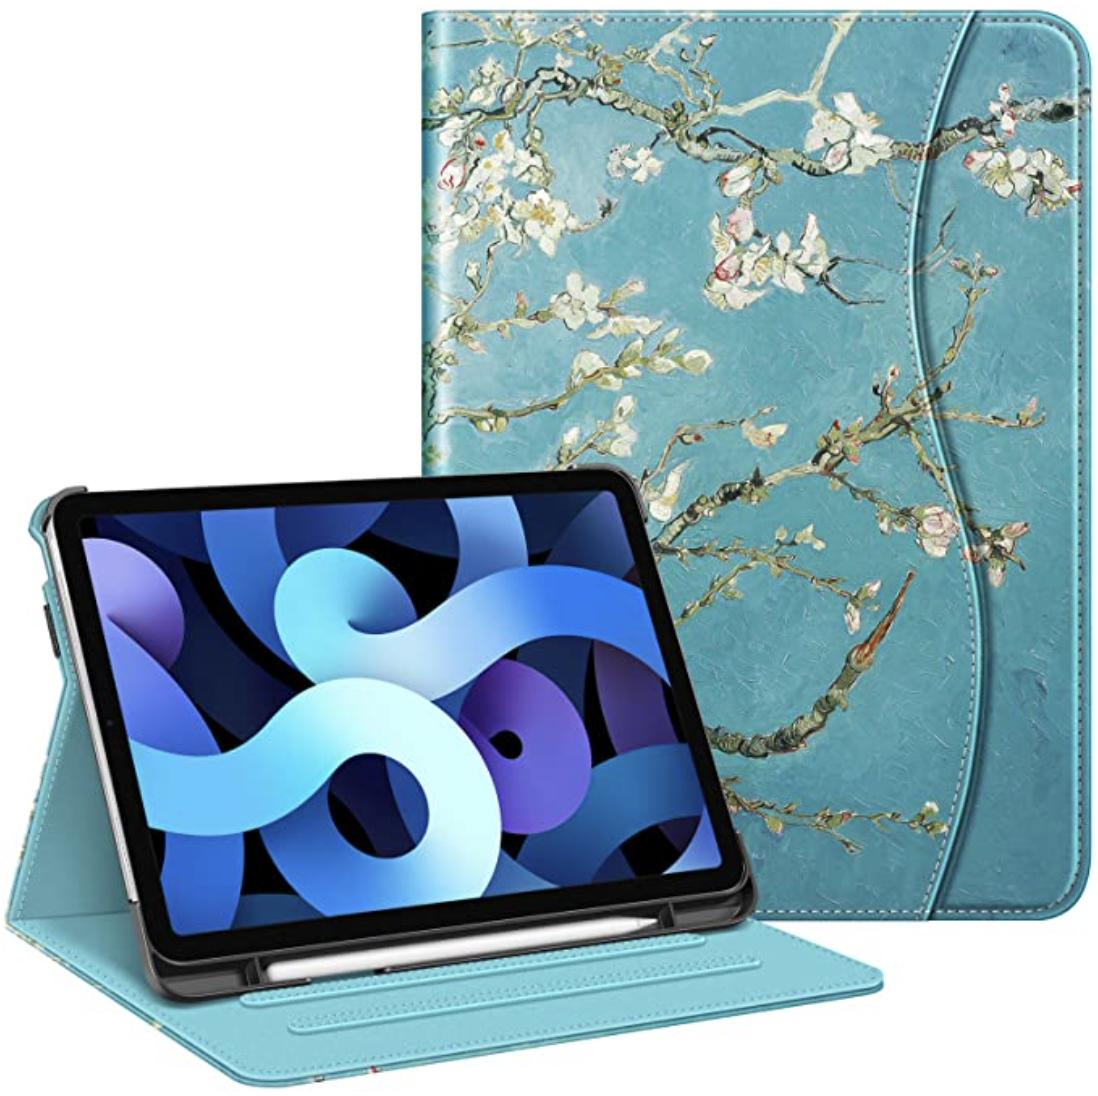 Finitie Case Ipad Air Render Cropped